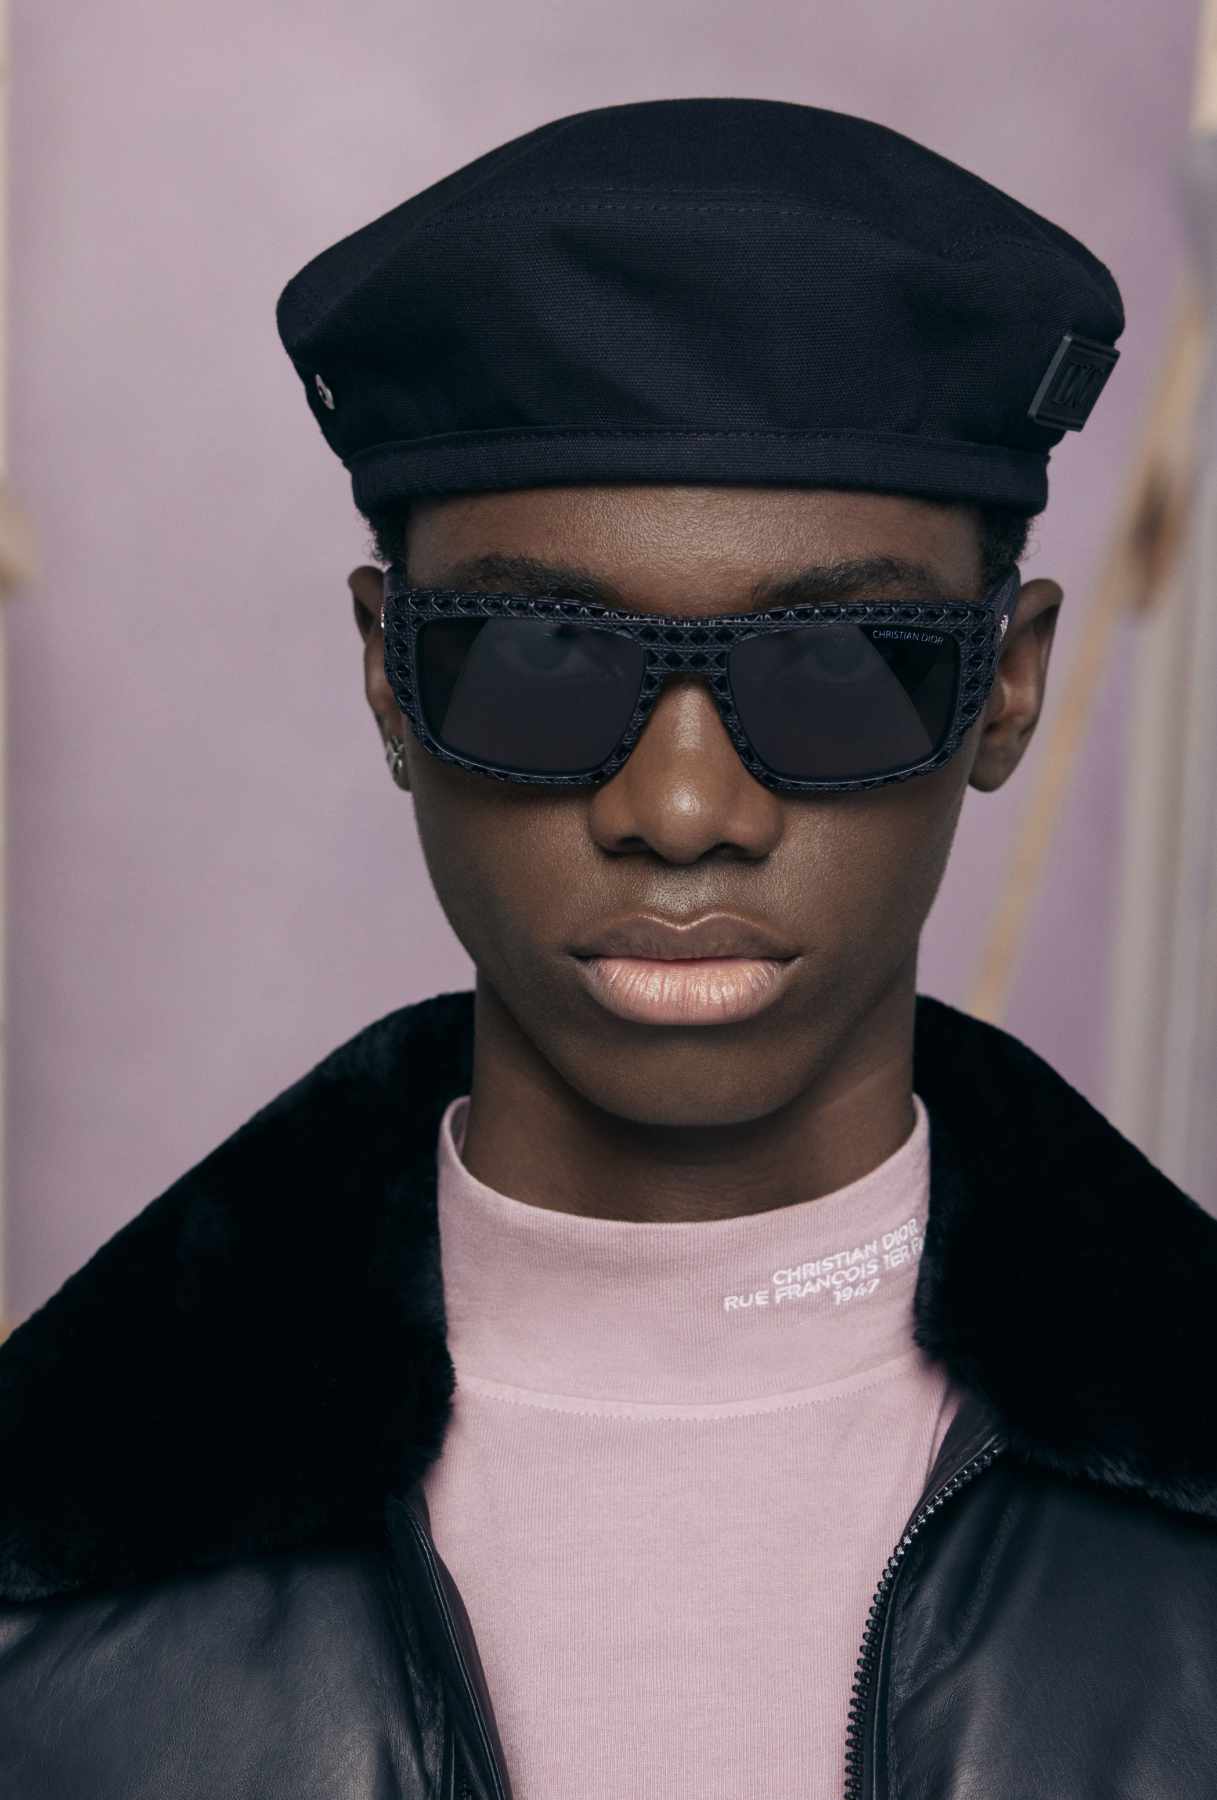 Dior's Spring 2024 Menswear Collection Explores Masculinity